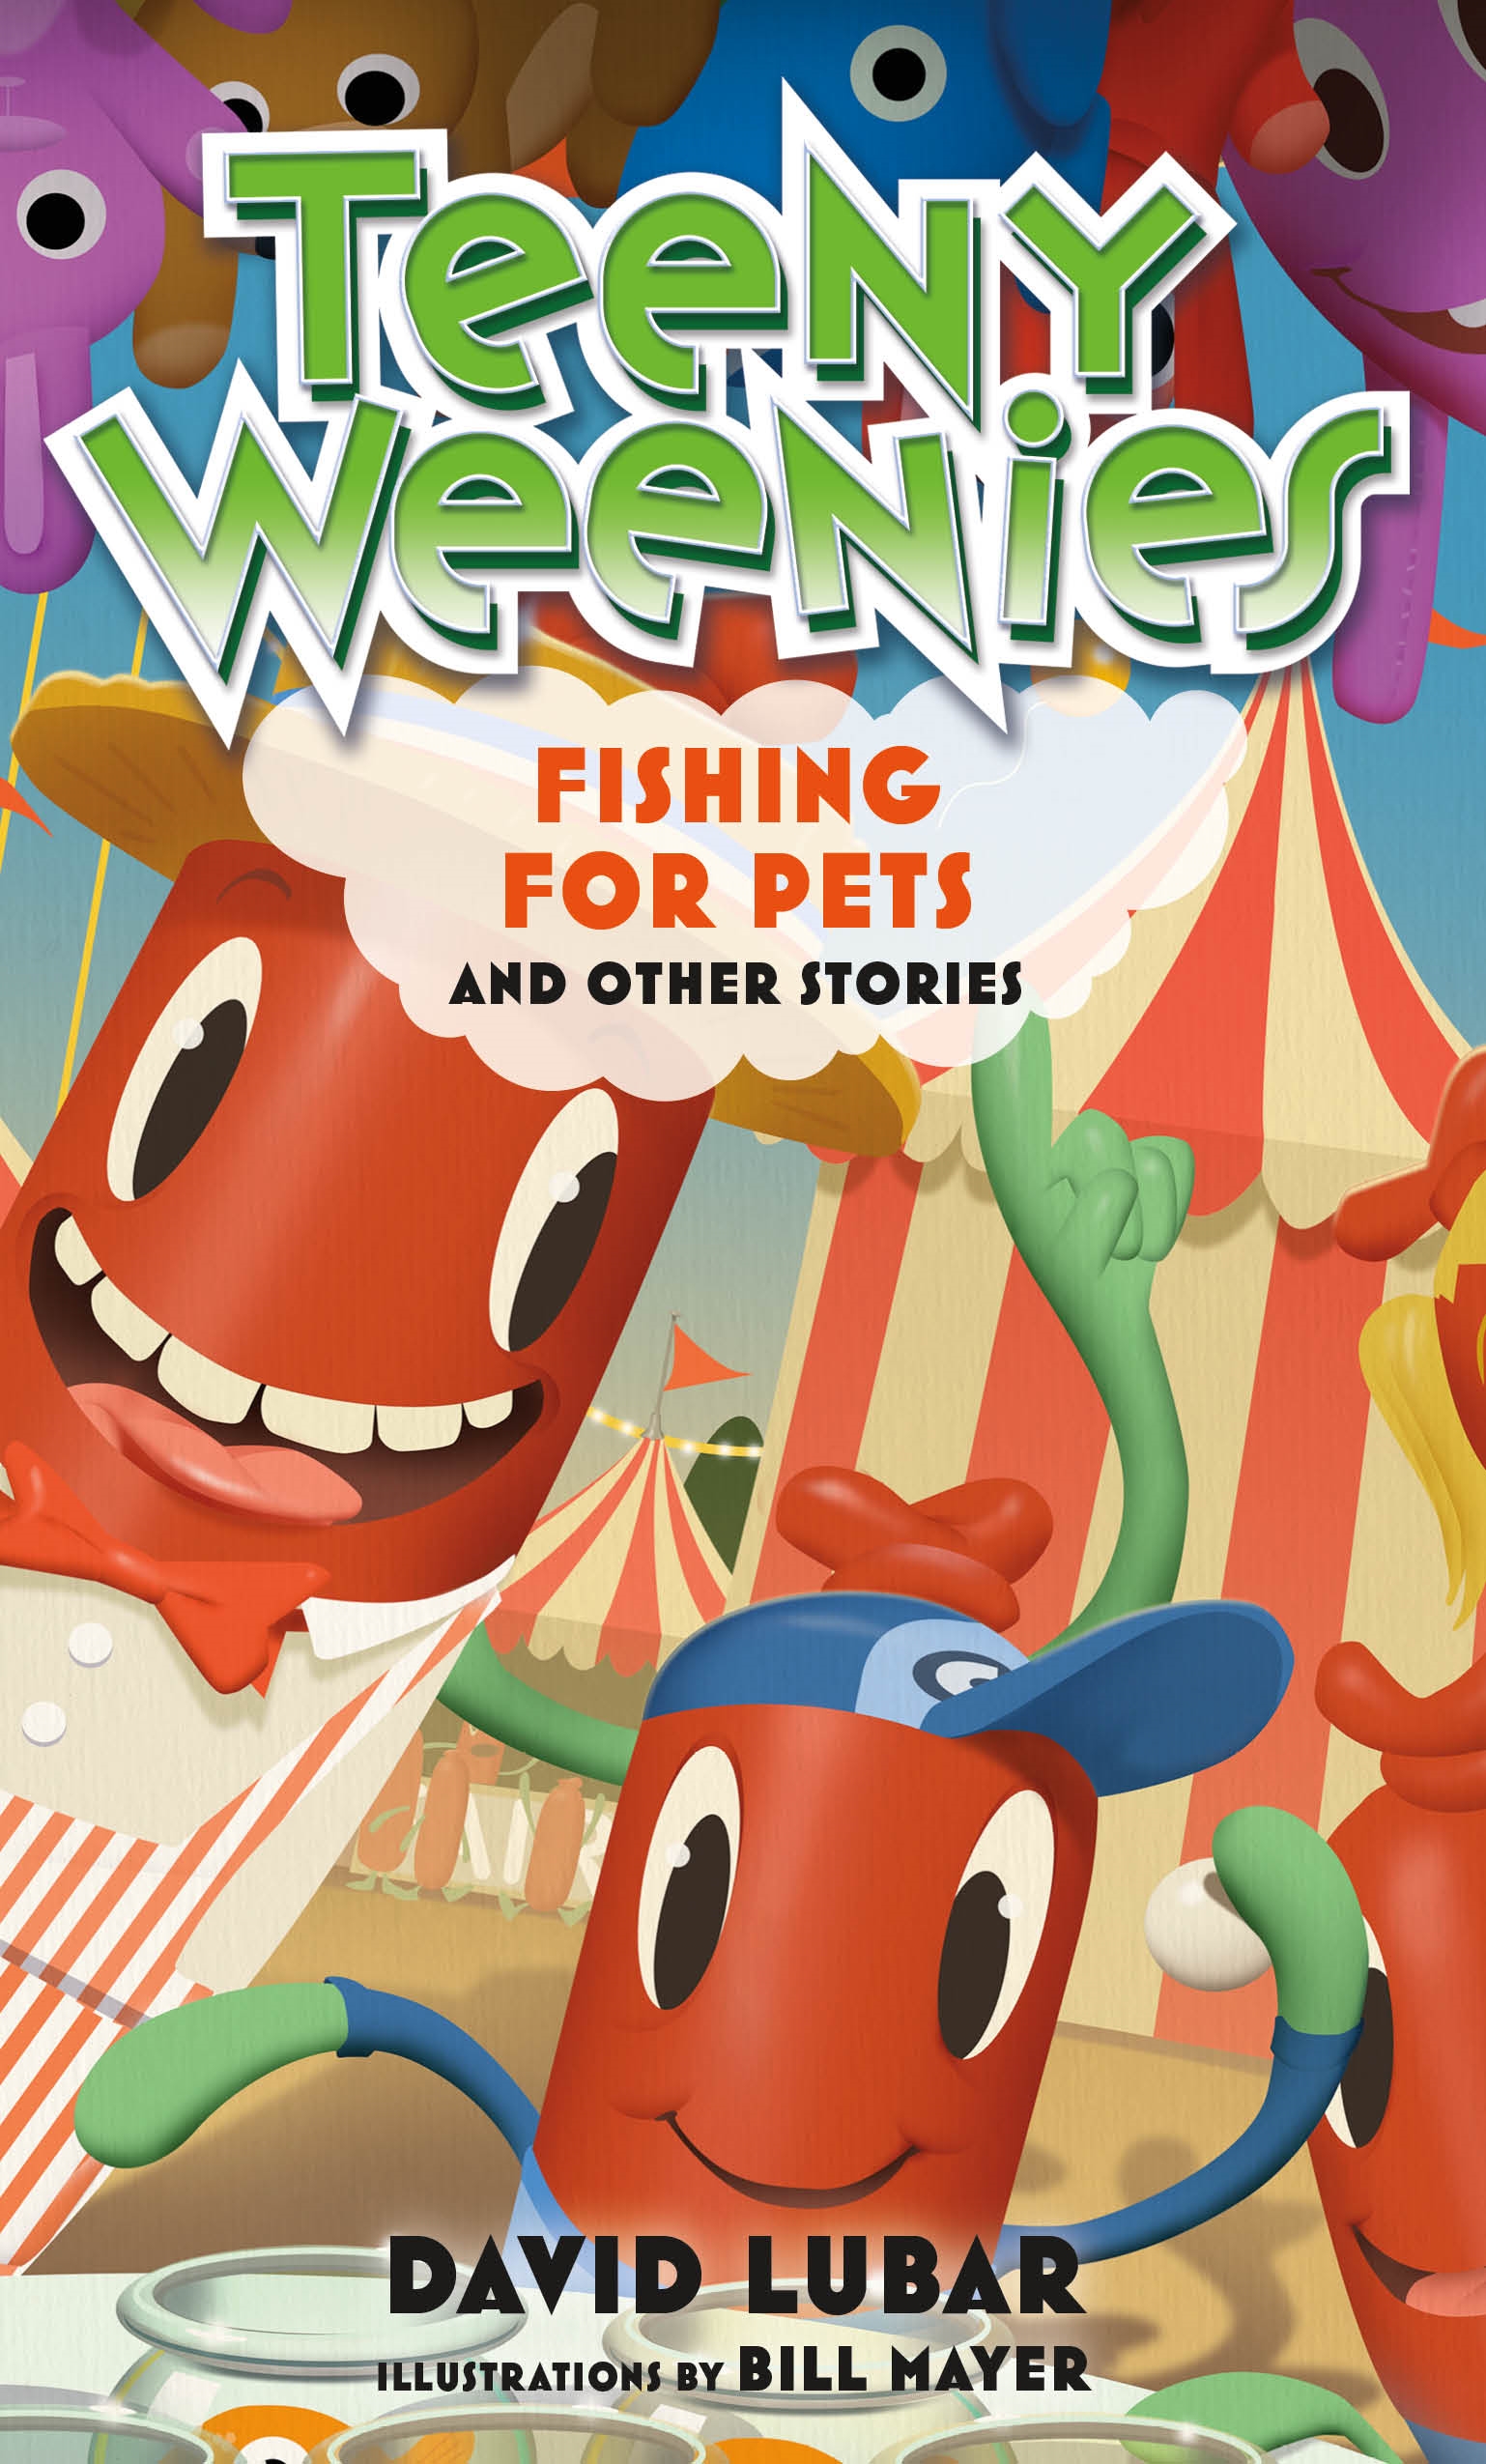 Teeny Weenies: Fishing for Pets : And Other Stories by David Lubar